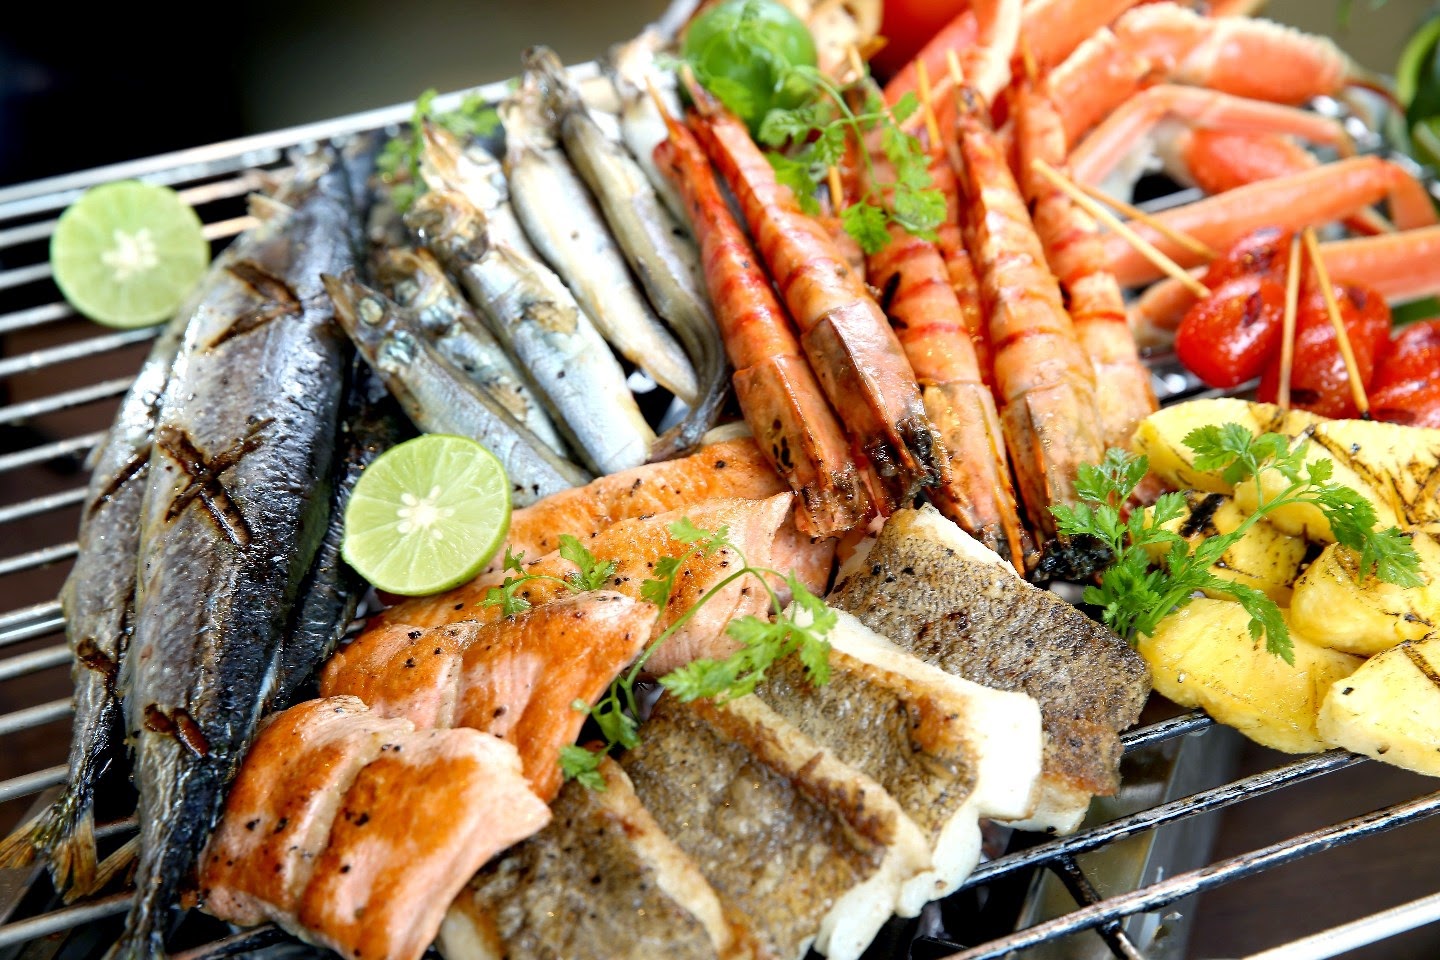 BBQ SEAFOOD DINNER BUFFET AT HARBOUR PLAZA 8 DEGREES | Malaysian Foodie